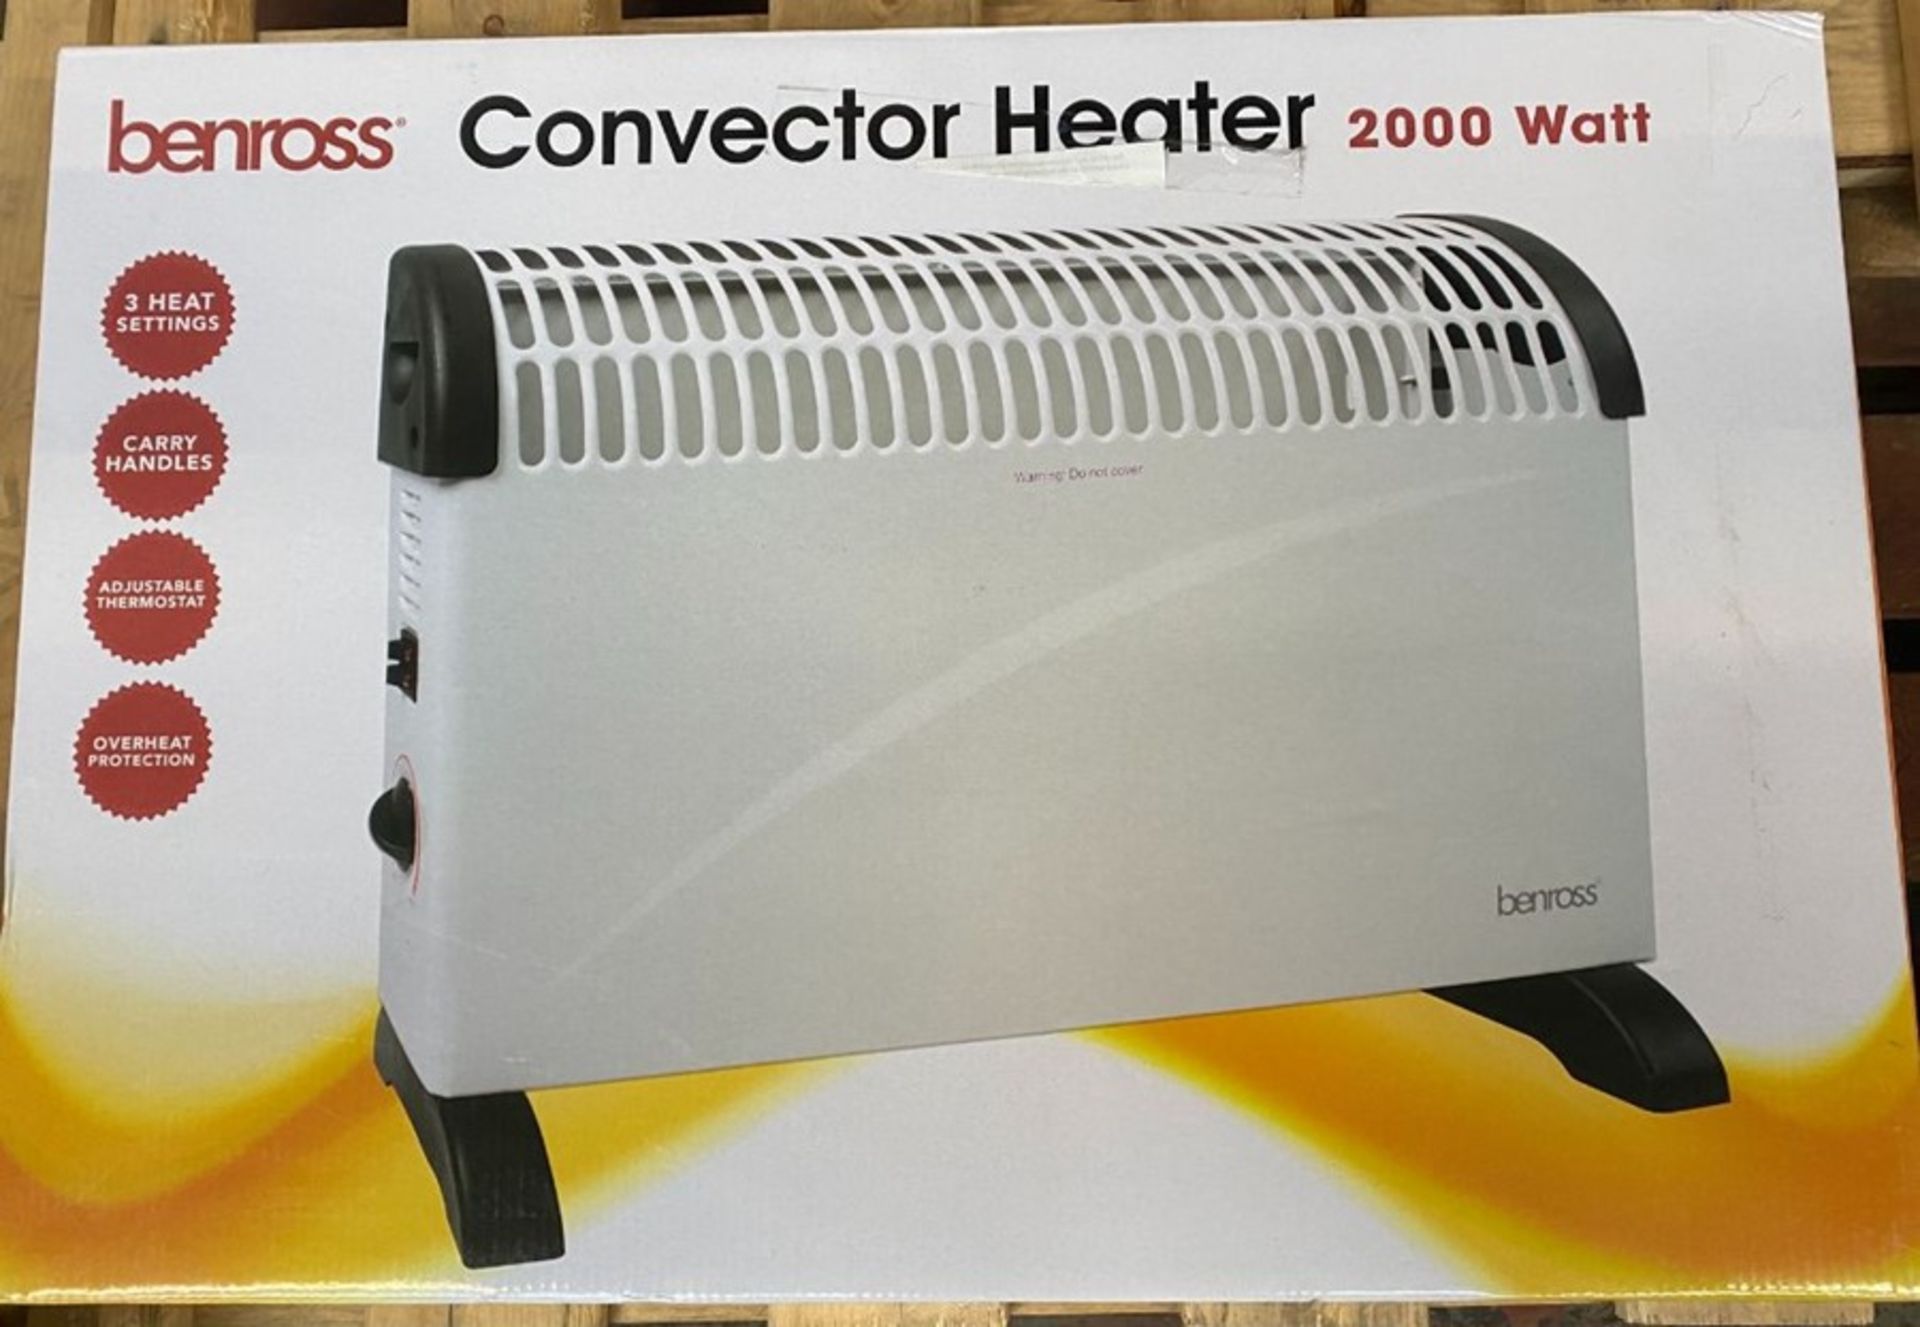 ONE LOT TO CONTAIN A BENROSS CONVECTOR HEATER RRP £20.00 (CUSTOMER RETURNS UNTESTED BY DMR)